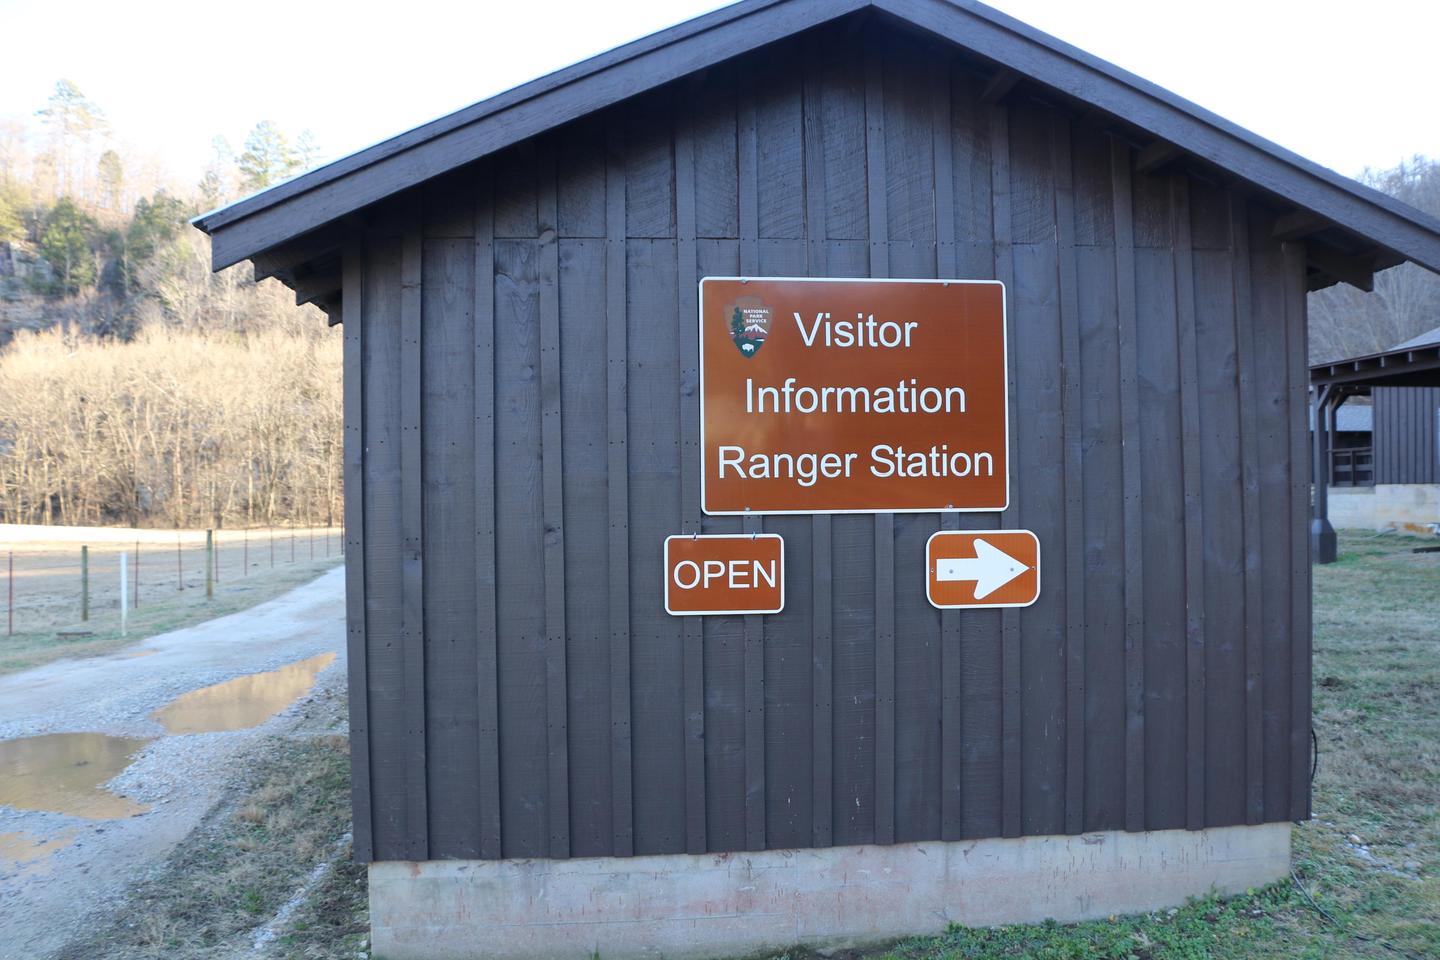 Steel Creek Ranger StationThe Steel Creek Ranger Station is open seasonally so it is best to call ahead if you are planning to visit.